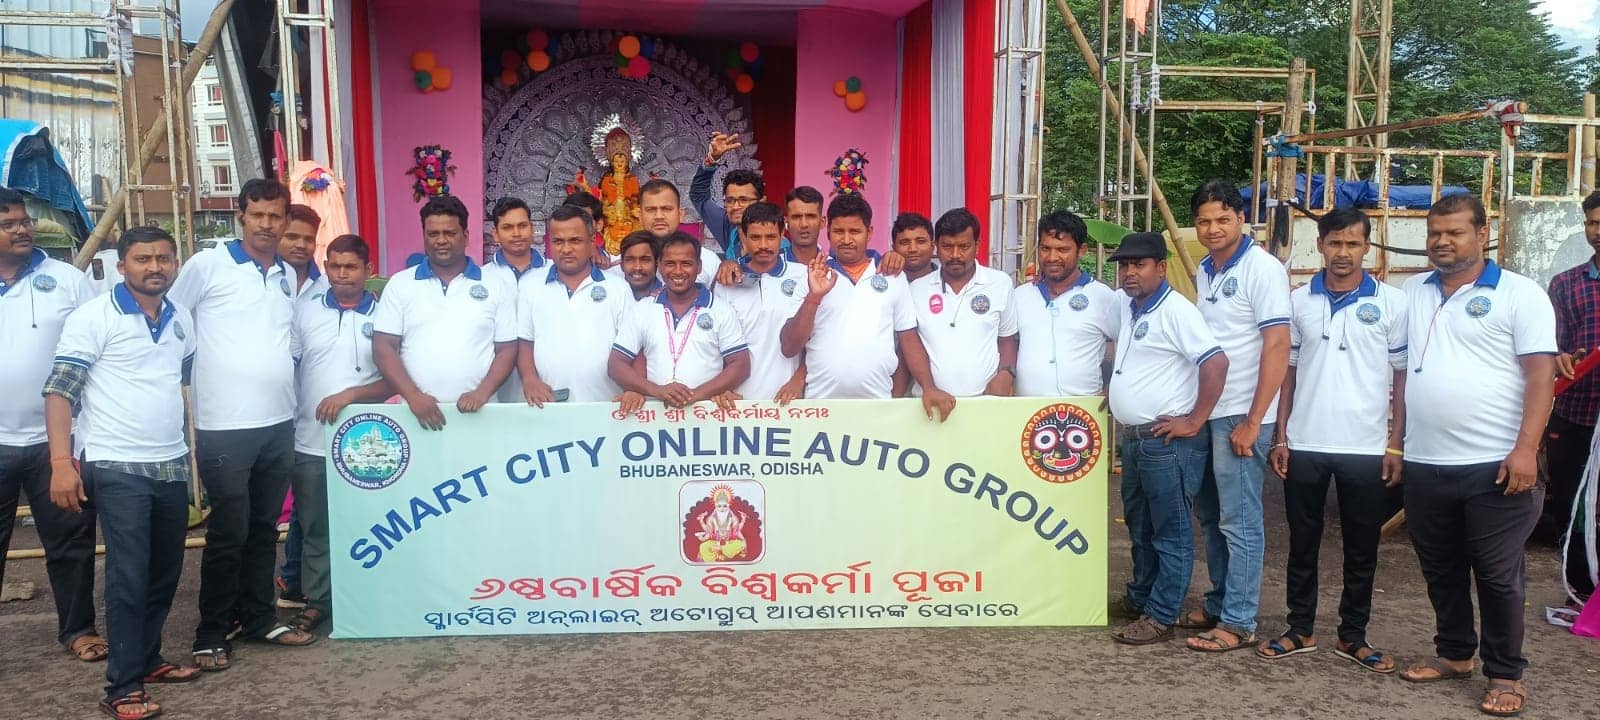 There are over 10,000 drivers in Bhubaneswar's Smart City Online Auto Association